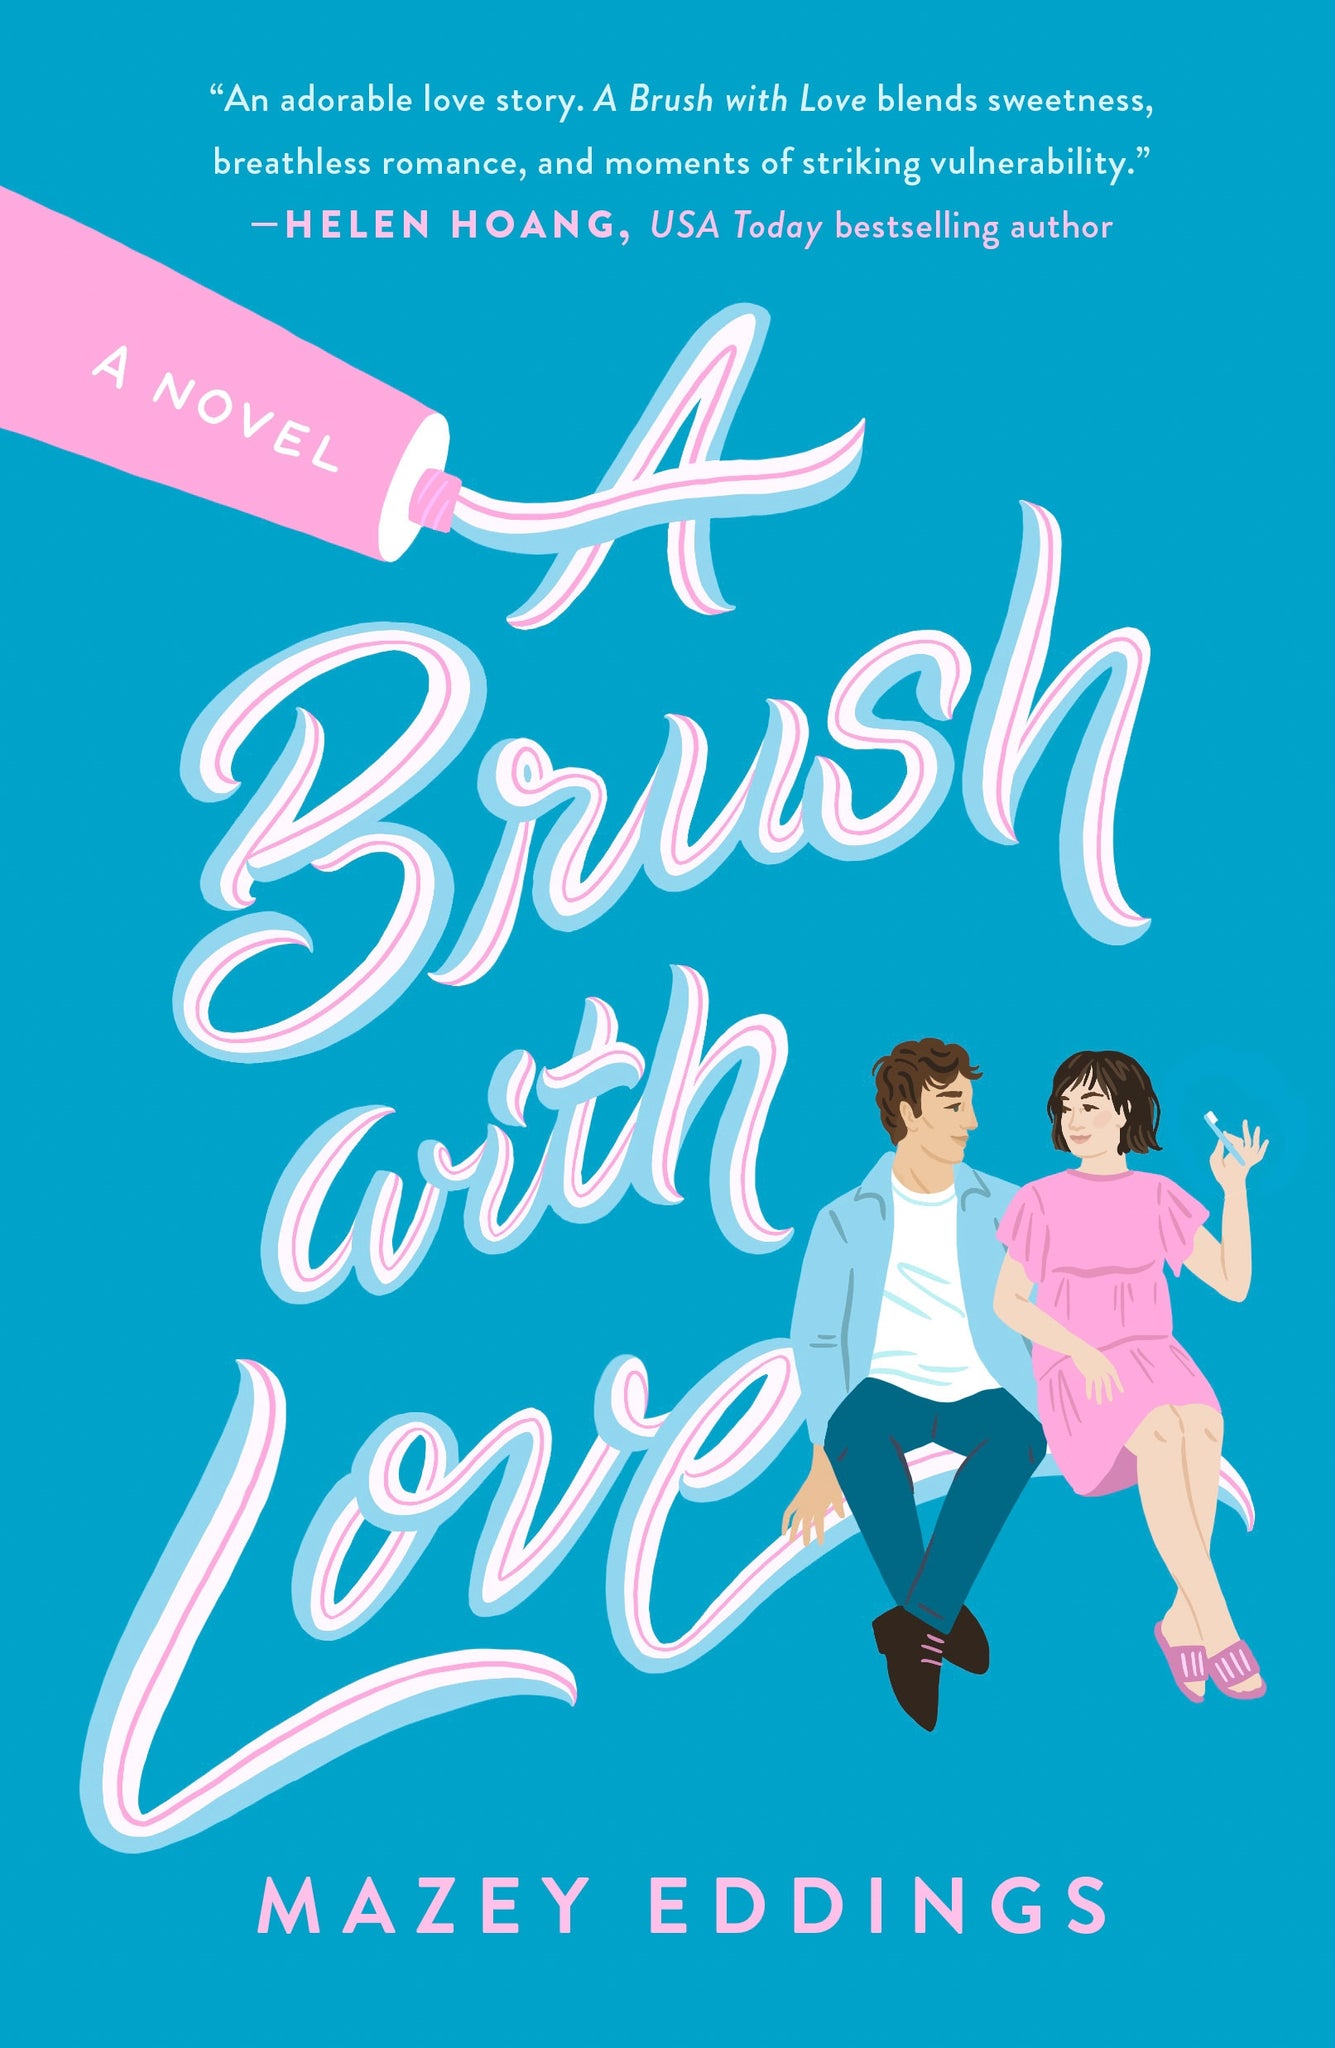 A Brush with Love by Mazey Eddings